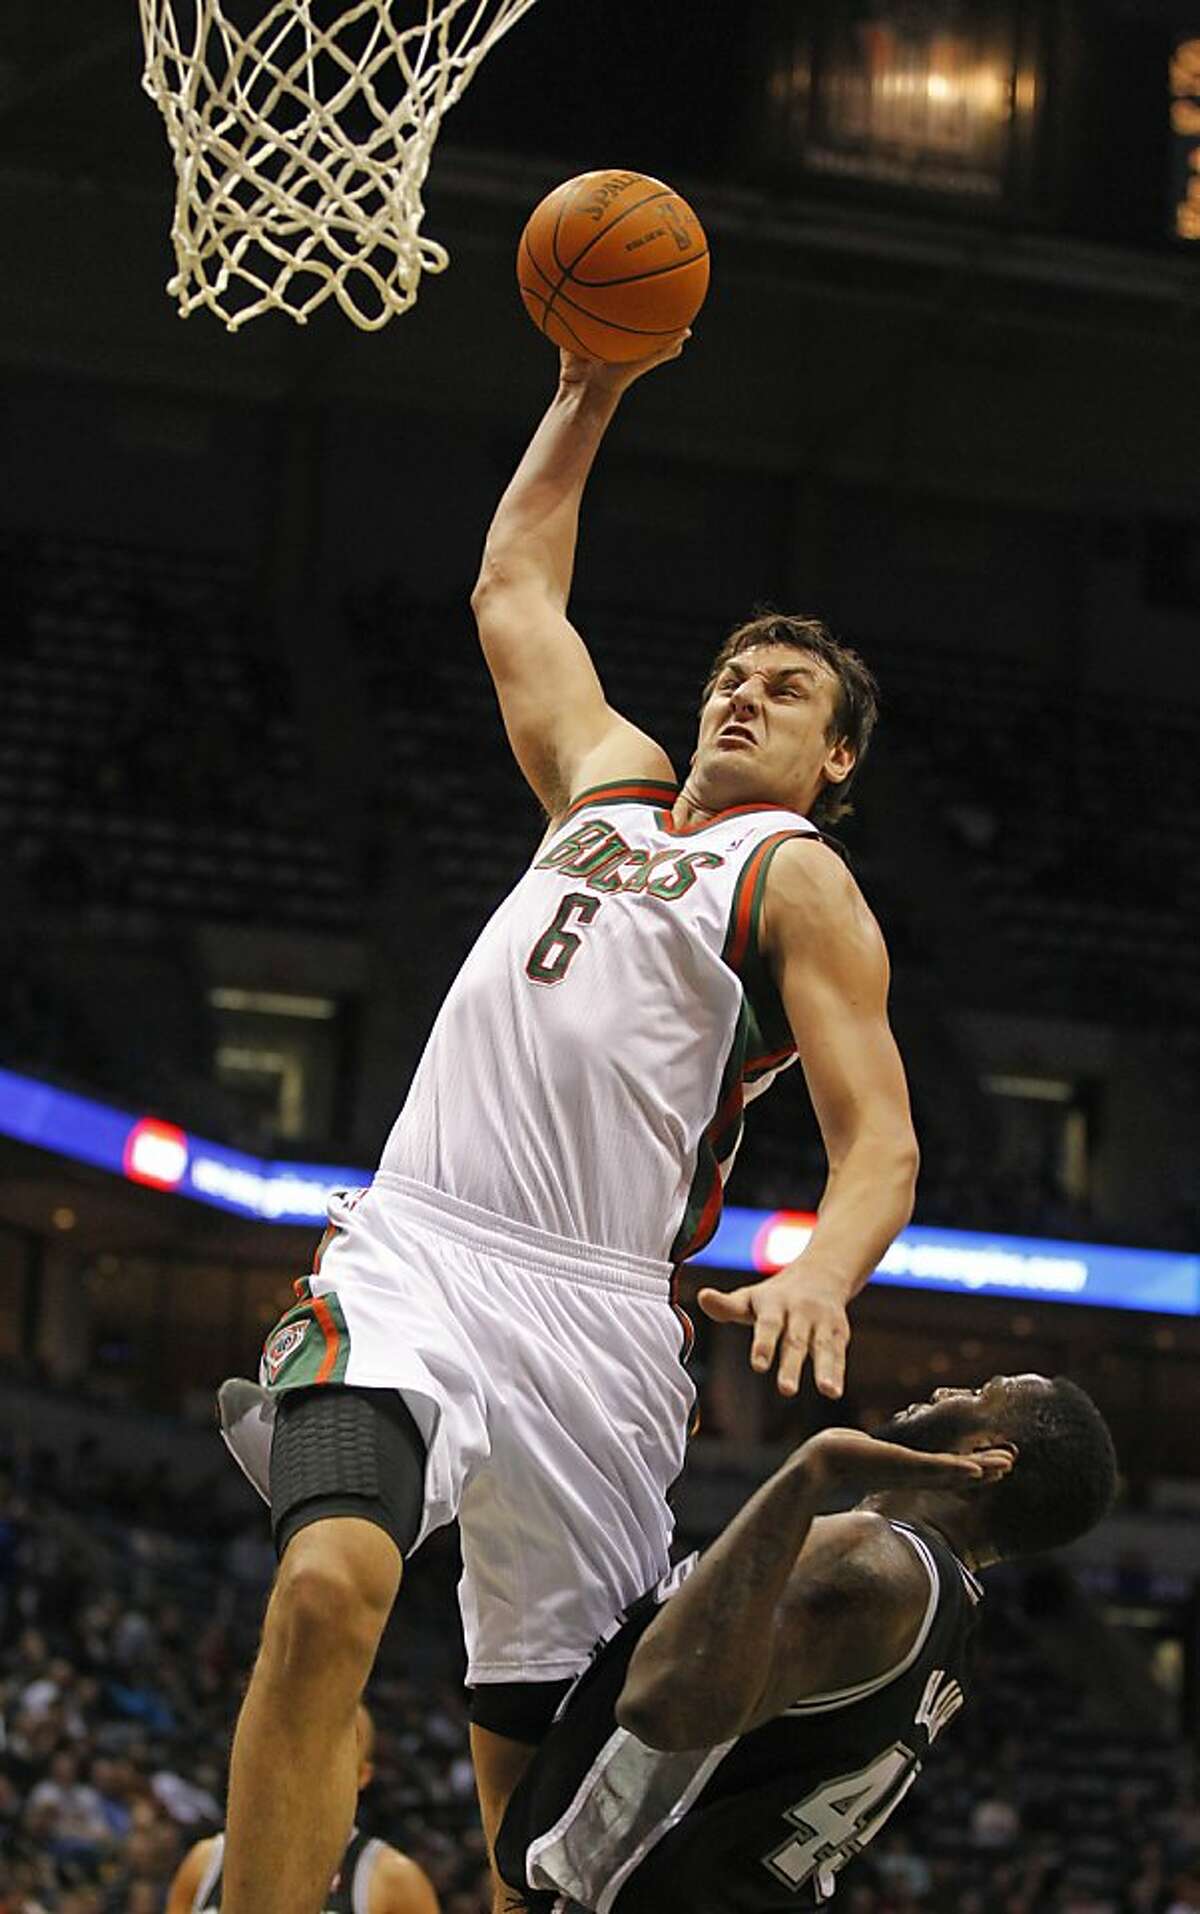 FILE - In this Jan. 10, 2012 file photo, Milwaukee Bucks' Andrew Bogut (6) dunks over San Antonio Spurs' DeJuan Blair during the second half of an NBA basketball game, in Milwaukee. The Bucks traded Bogut and Stephen Jackson to the Golden State Warriors on Tuesday night, March 13, 2012, for a three-player package headed by high-scoring guard Monta Ellis. (AP Photo/Jeffrey Phelps, File)